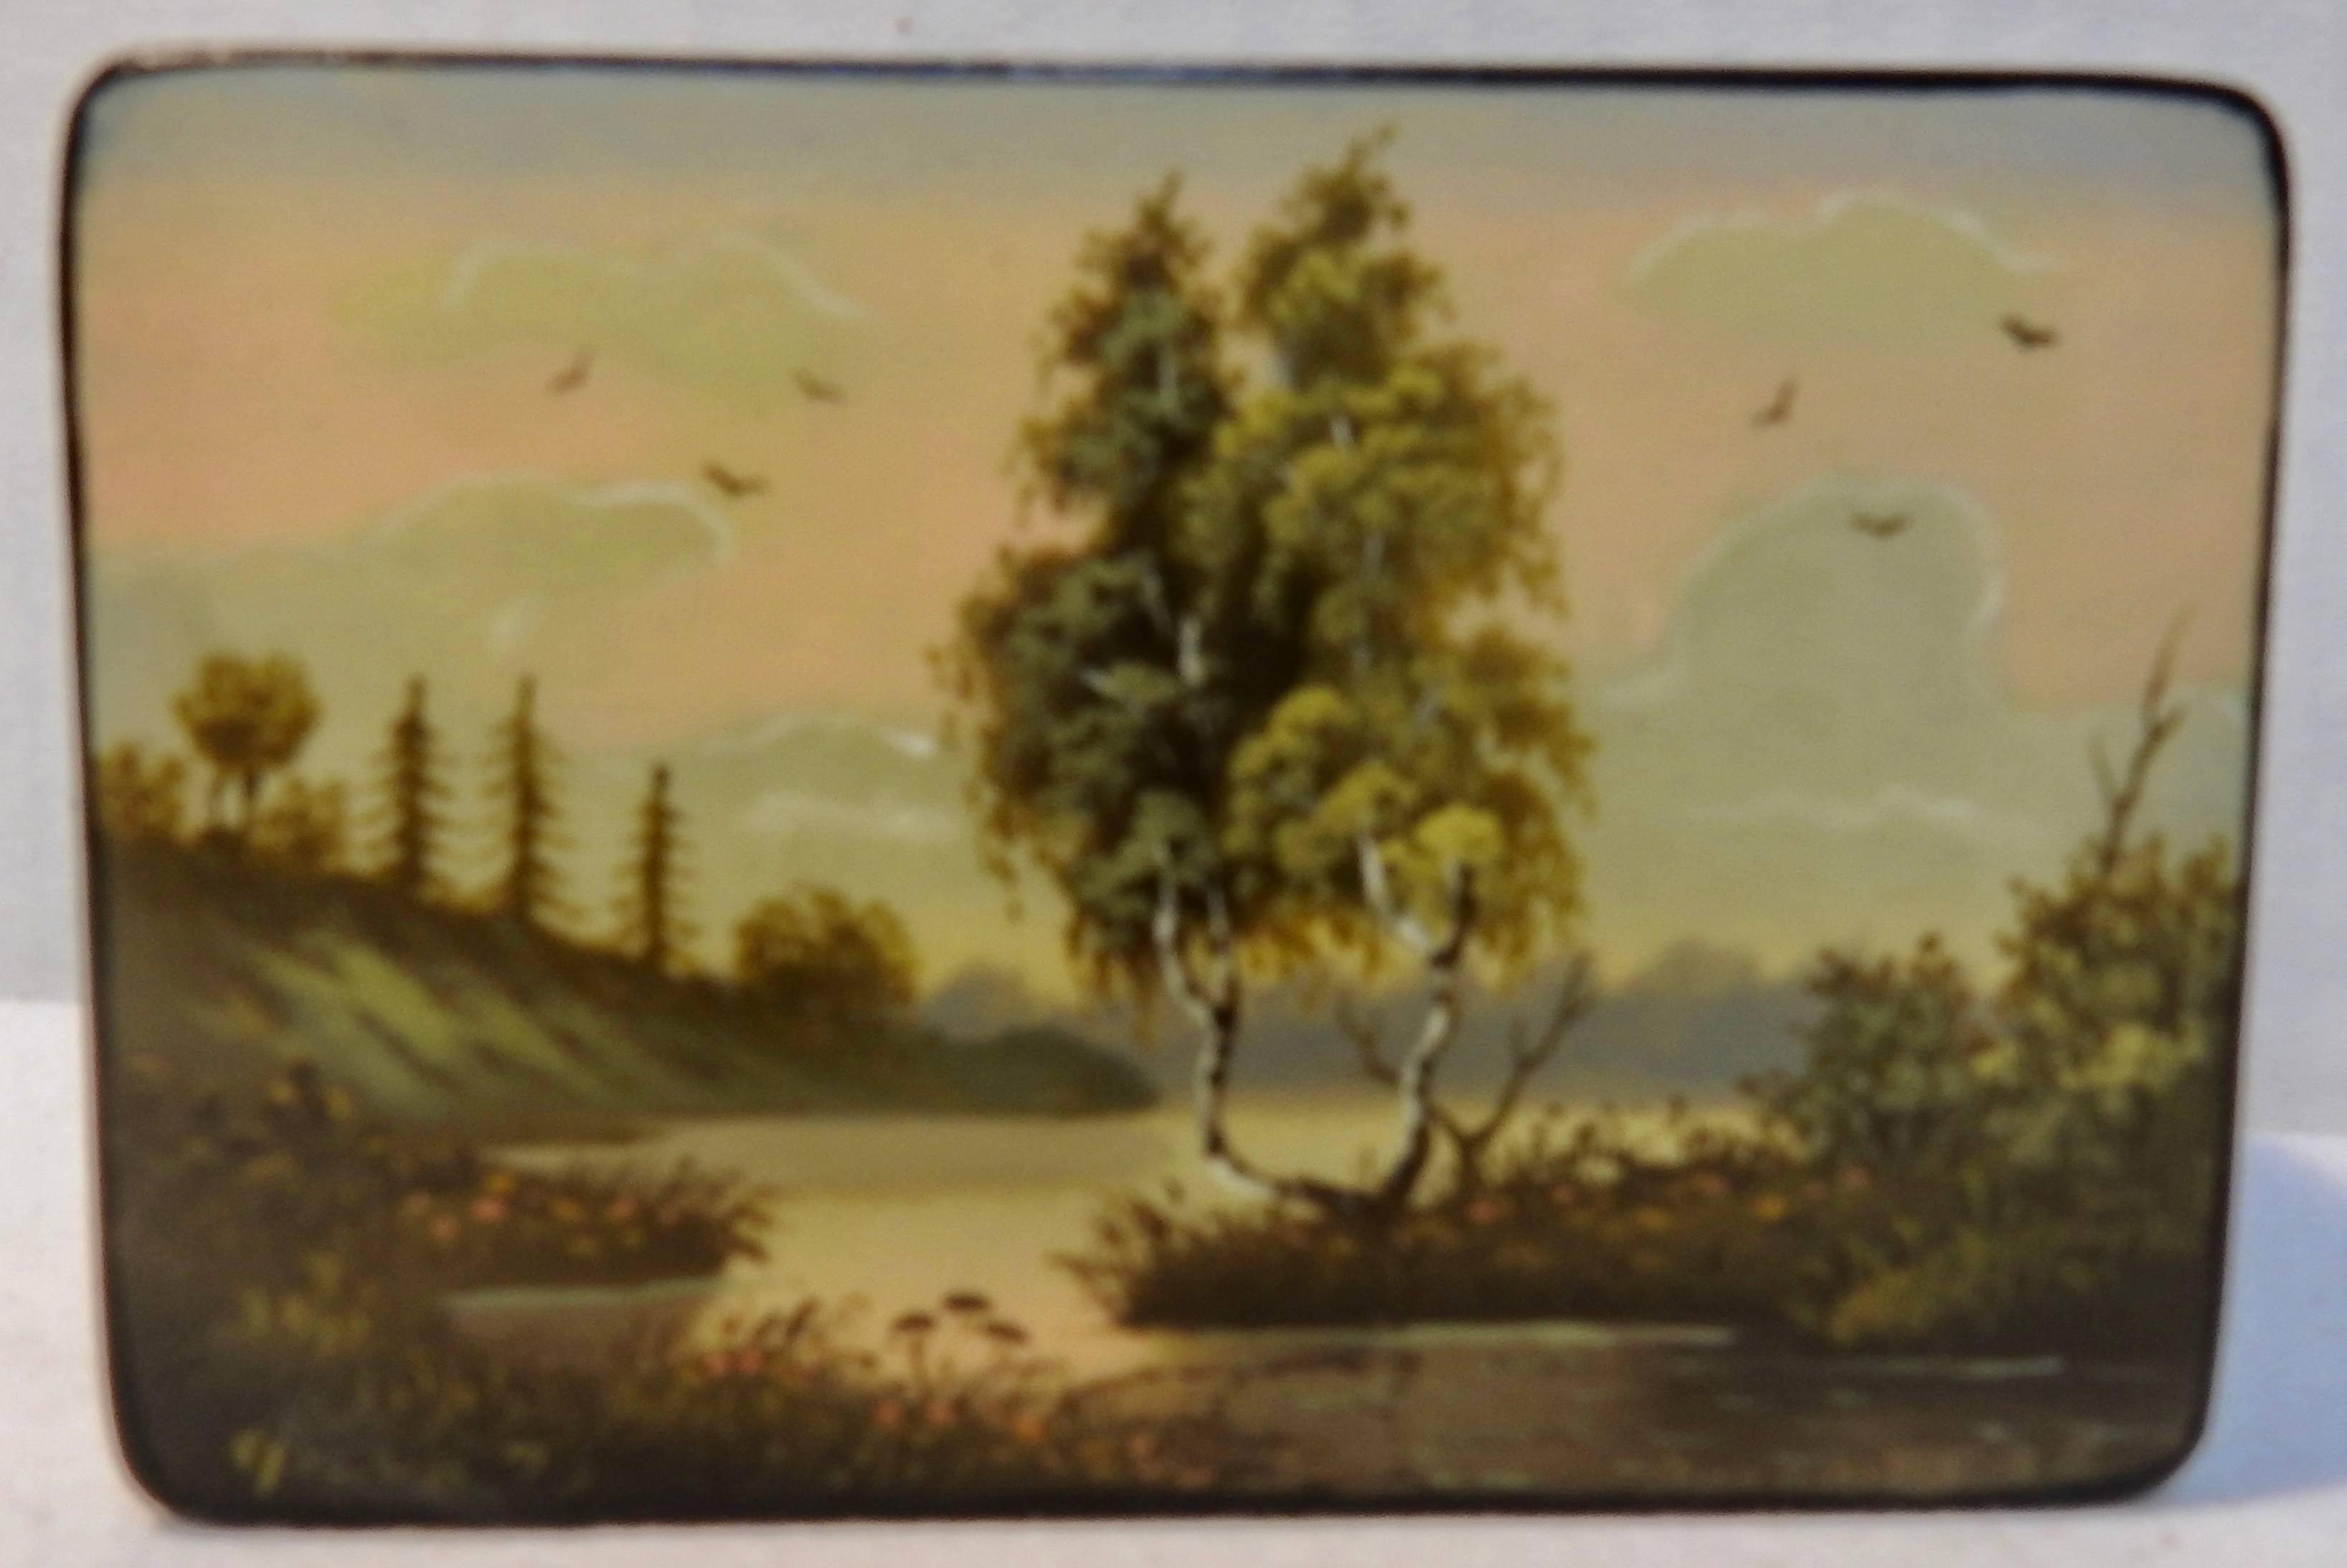 Featured is a Russian black lacquer snuff box with a vibrant red interior. The lid has a hand painted scene of trees along a river bank with birds flying around. The sky has soft, pastel colors. Dated 1973.